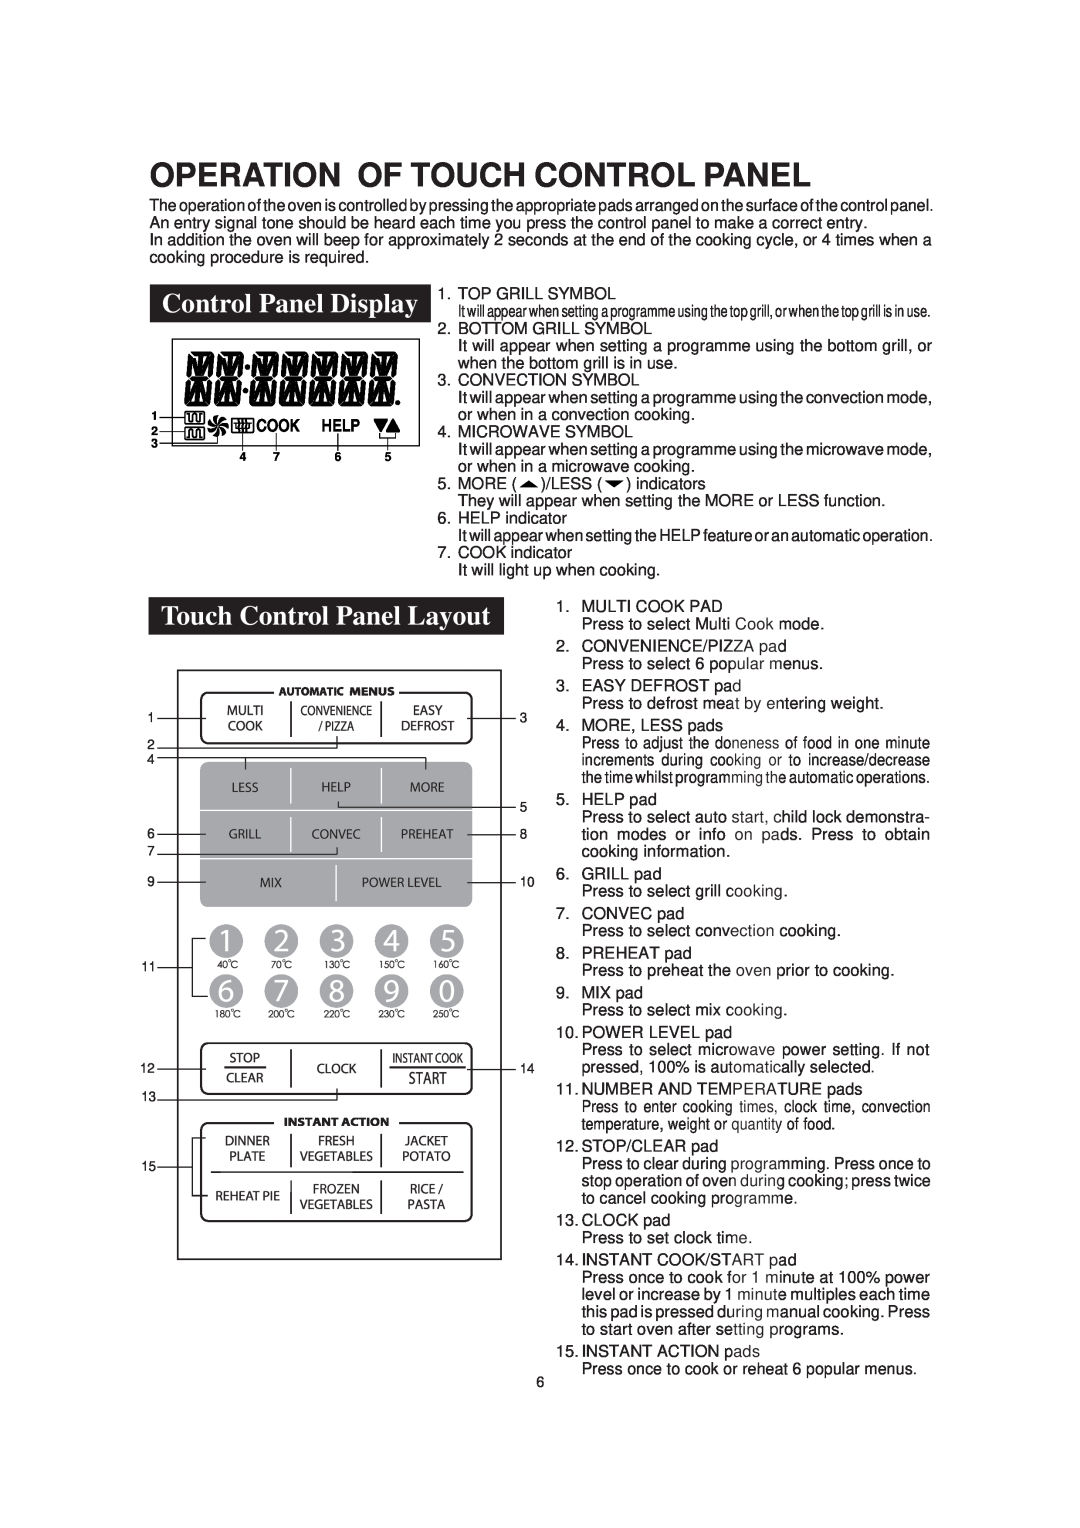 Sharp R-890N operation manual Operation Of Touch Control Panel, Control Panel Display, Touch Control Panel Layout 